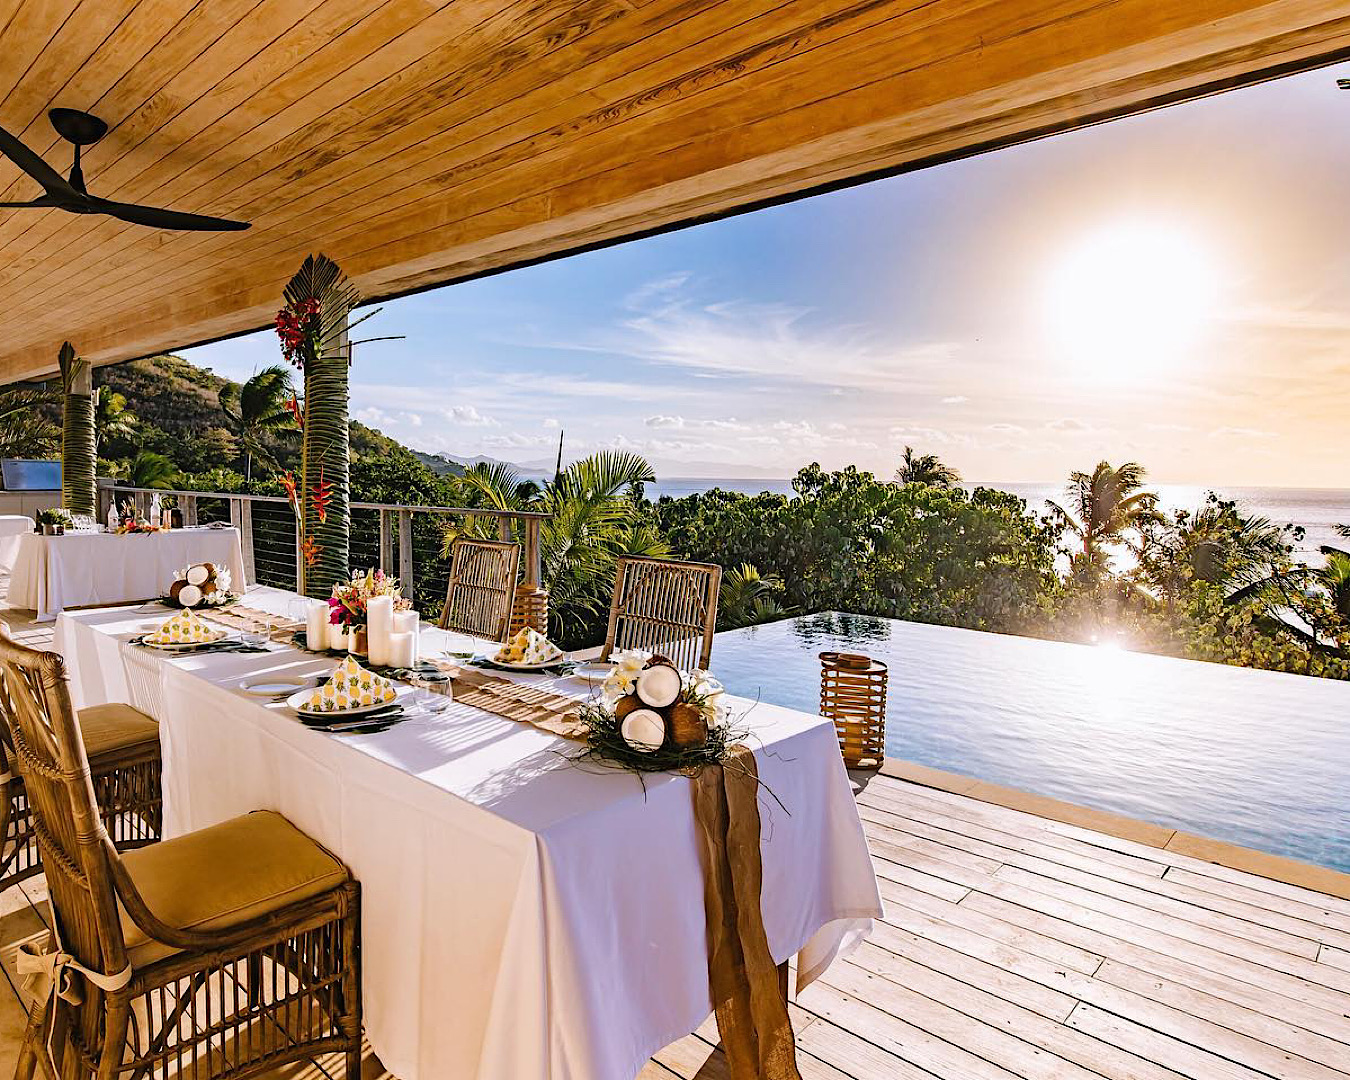 A beautiful meal setting on a deck with an infinity pool and sea views at Kokomo Private Island.